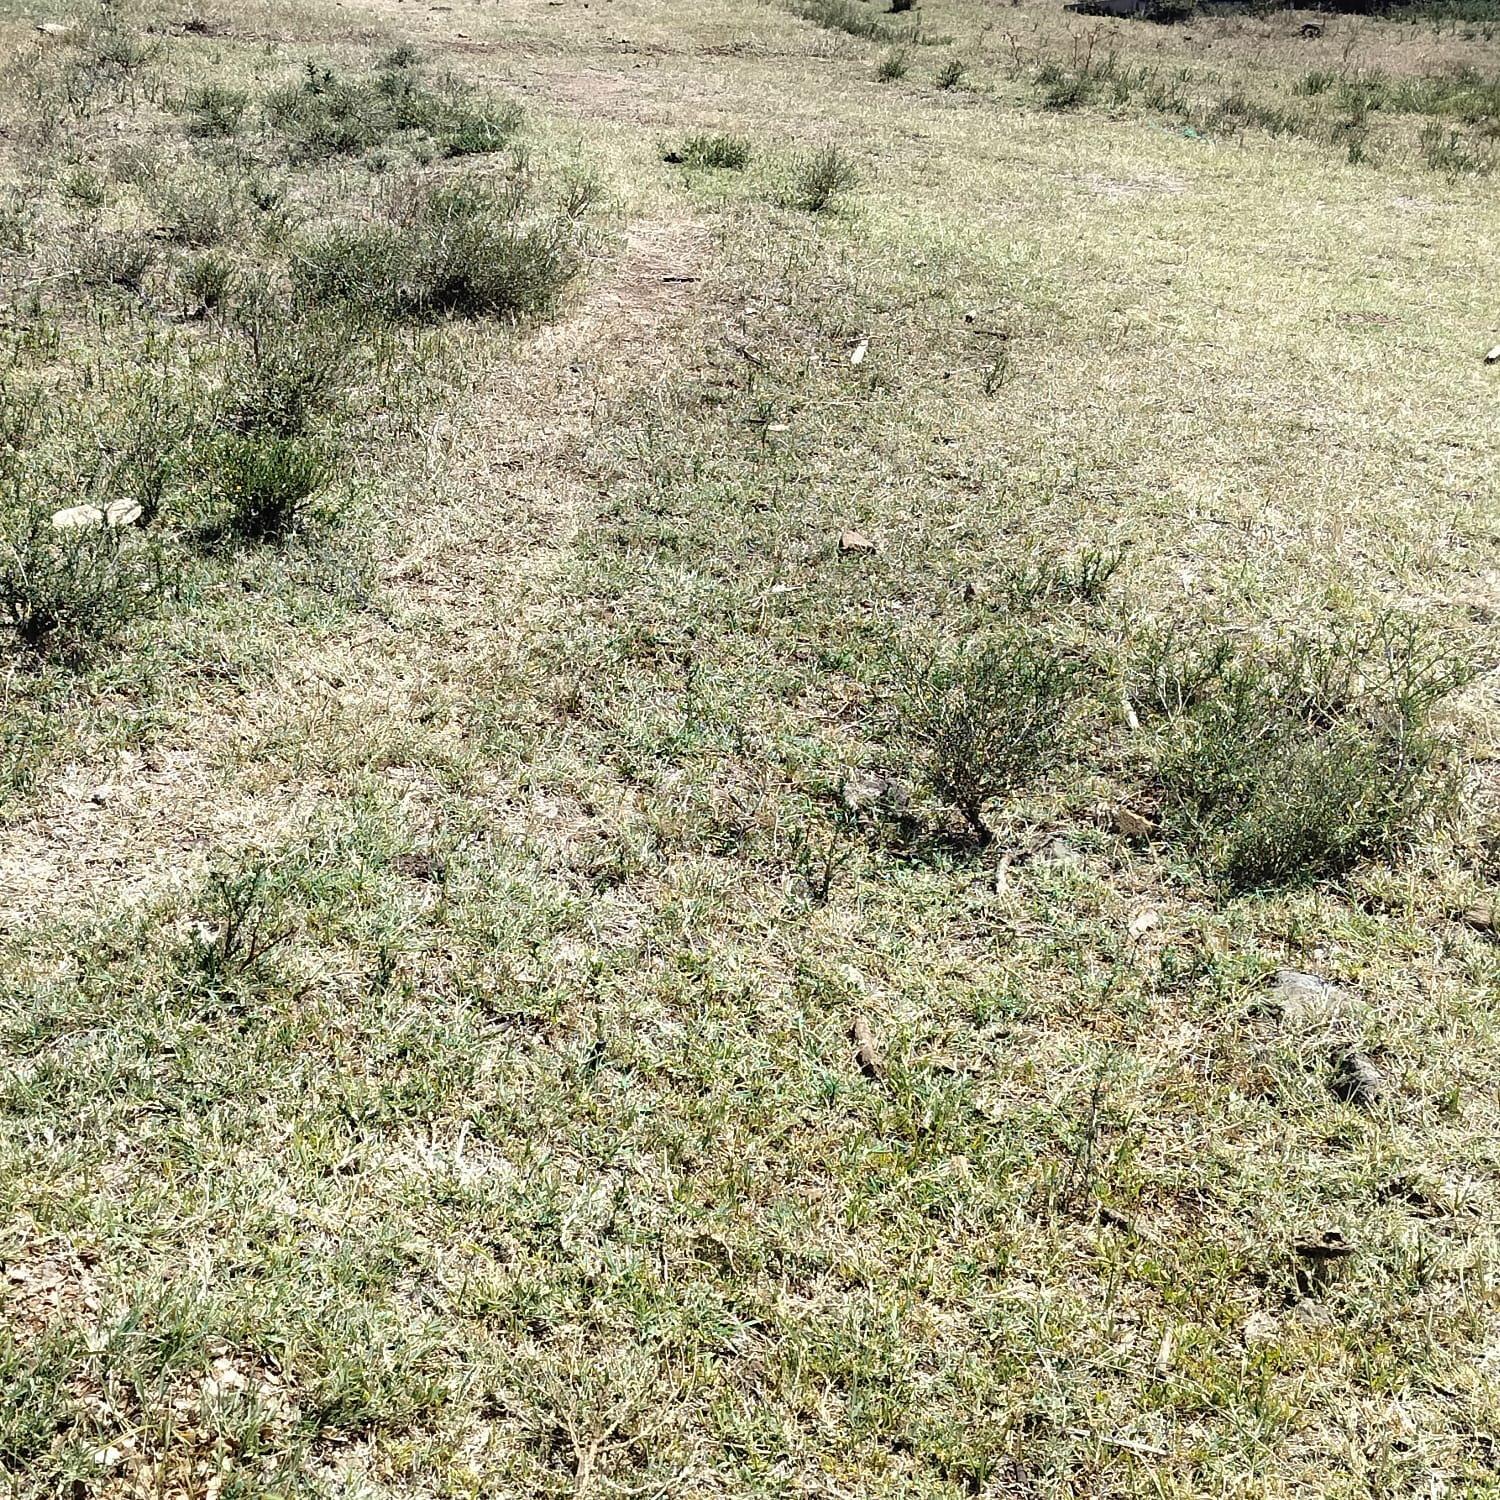 1/8 ACRE LAND FOR SALE IN KERARAPON 1/4 ACRE LAND FOR SALE IN KERARAPON 1/2 ACRE LAND FOR SALE IN KERARAPON 1 ACRE LAND FOR SALE IN KERARAPON, Karen, Ngong Musilli Homes